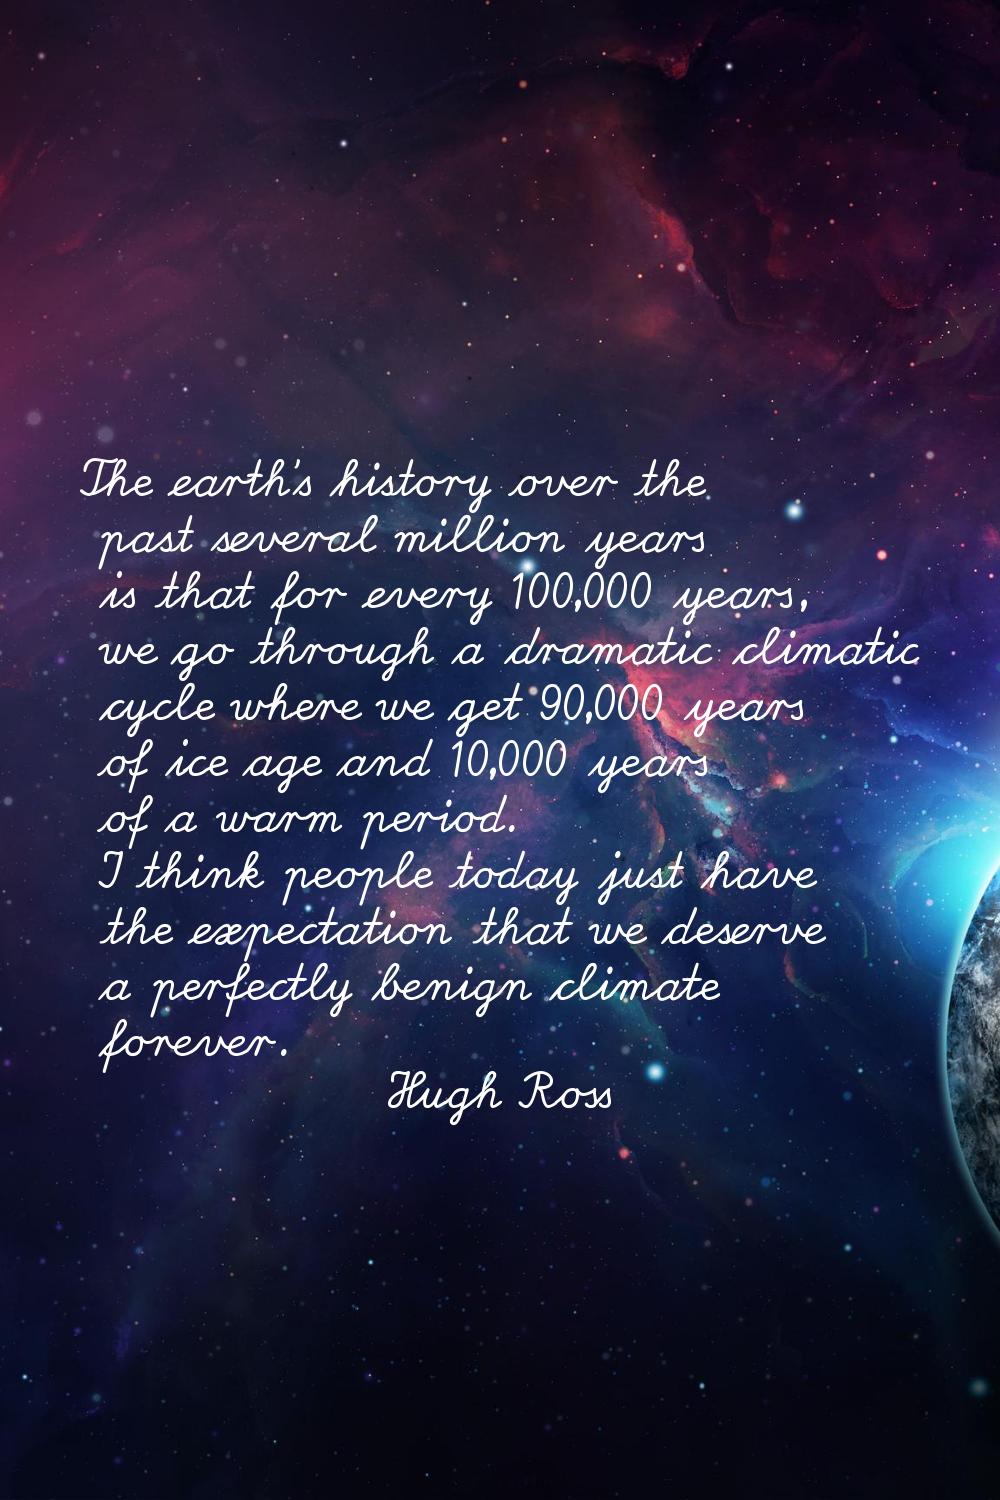 The earth's history over the past several million years is that for every 100,000 years, we go thro